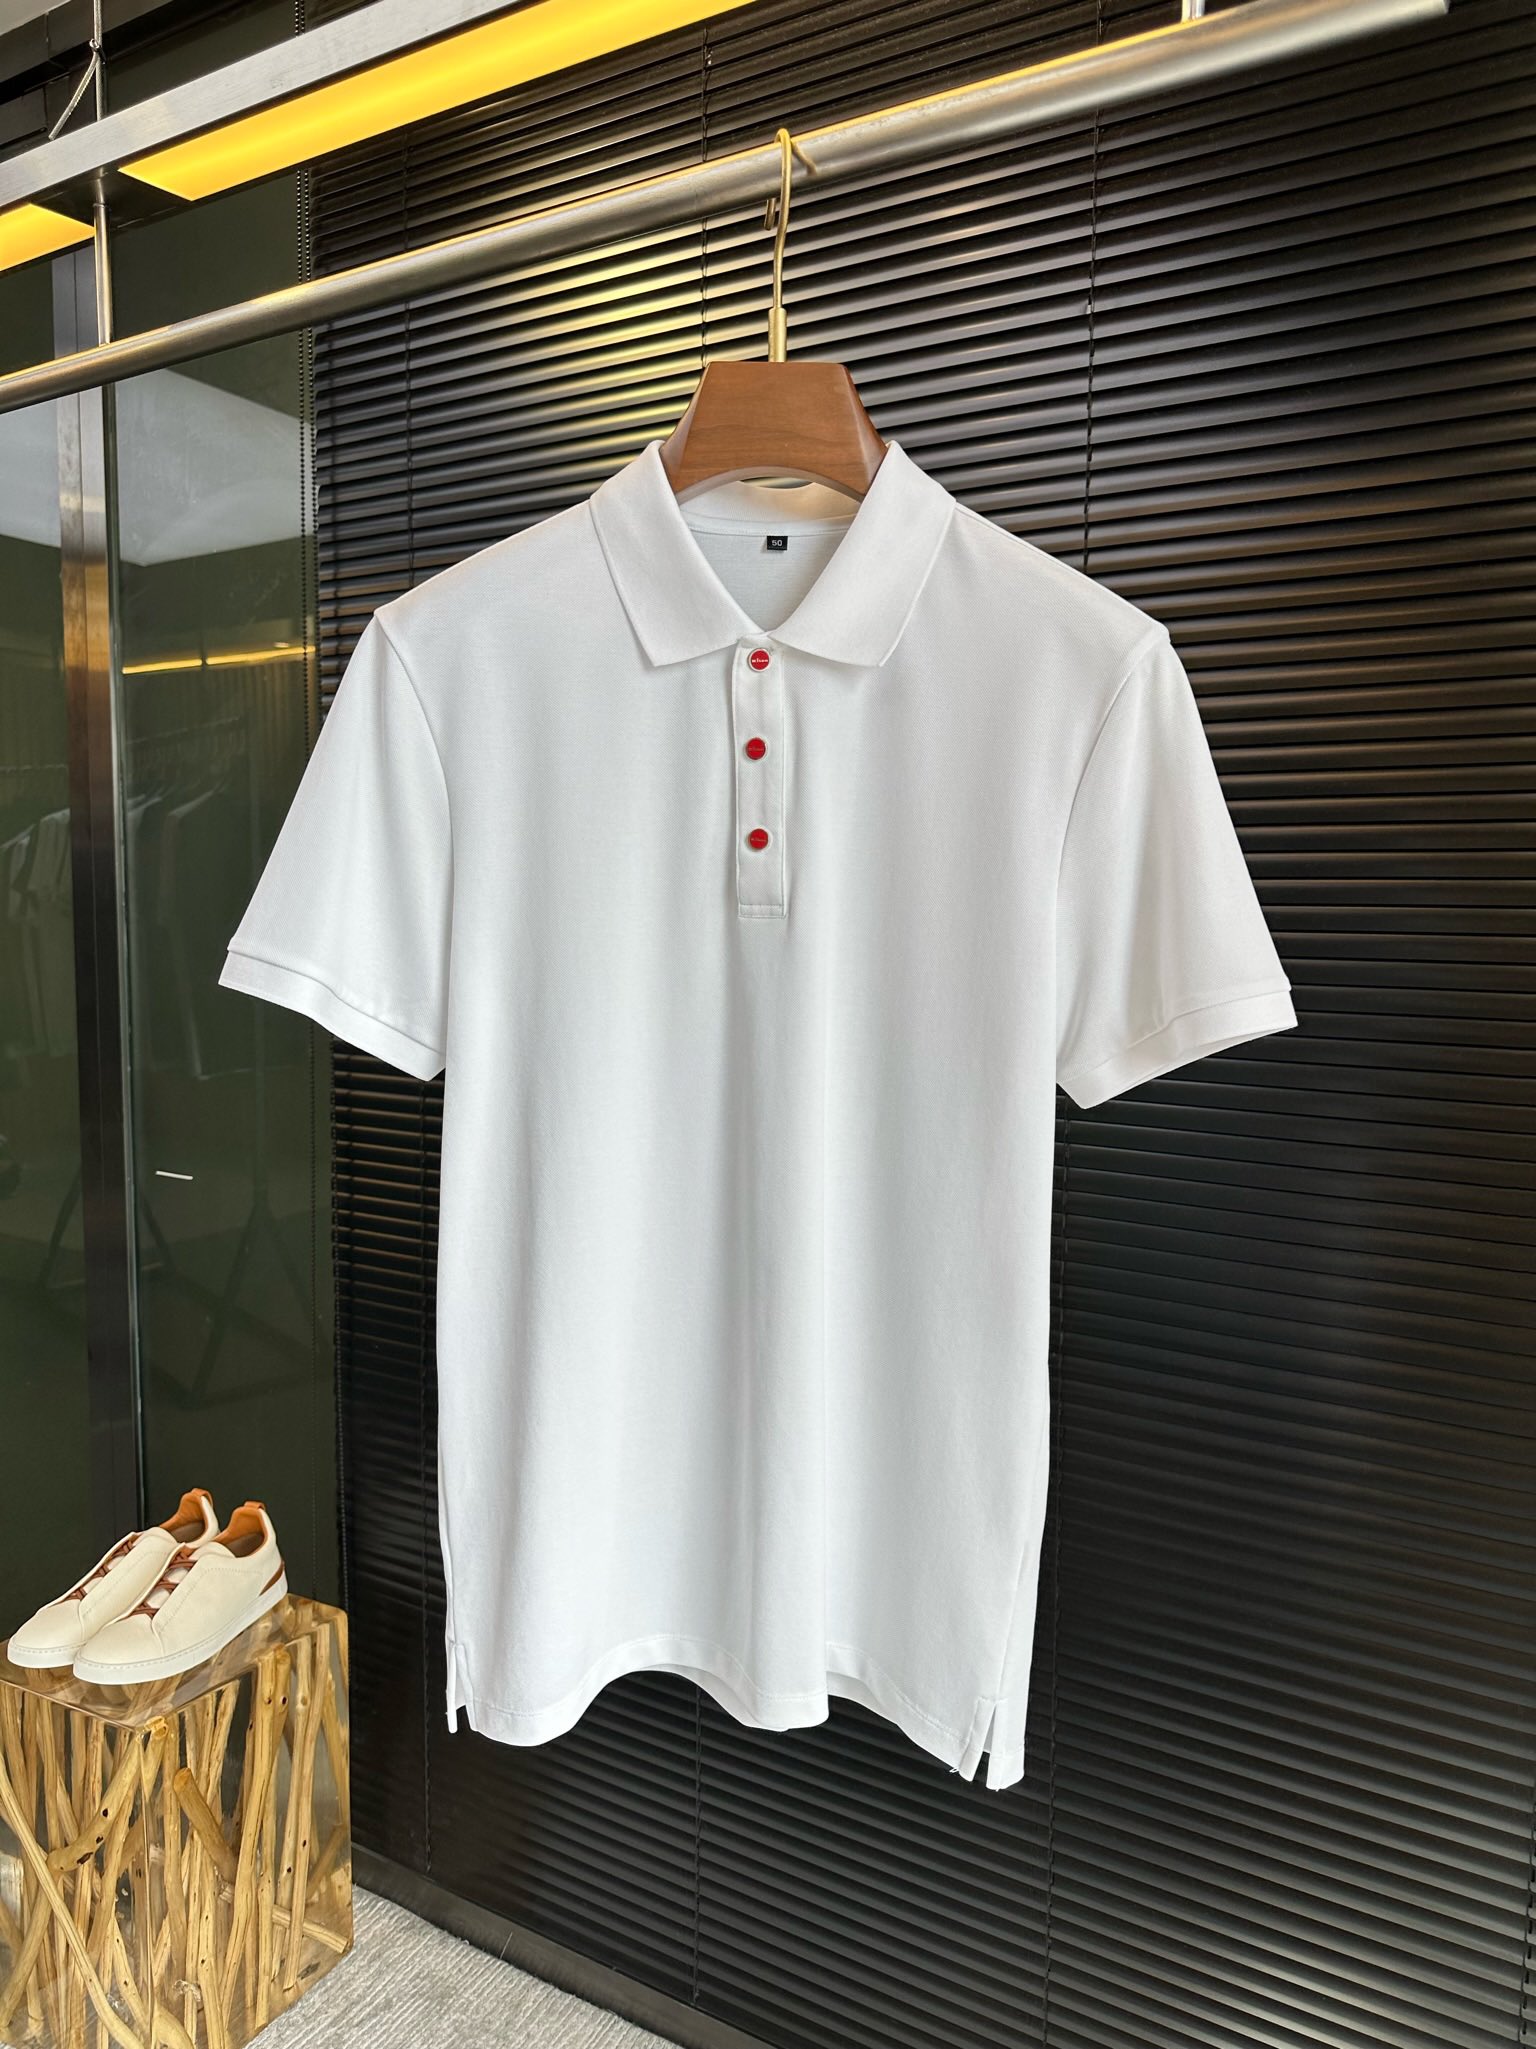 Clothing Polo Top Quality Website
 Black Red White Cotton Polyester Quick Dry